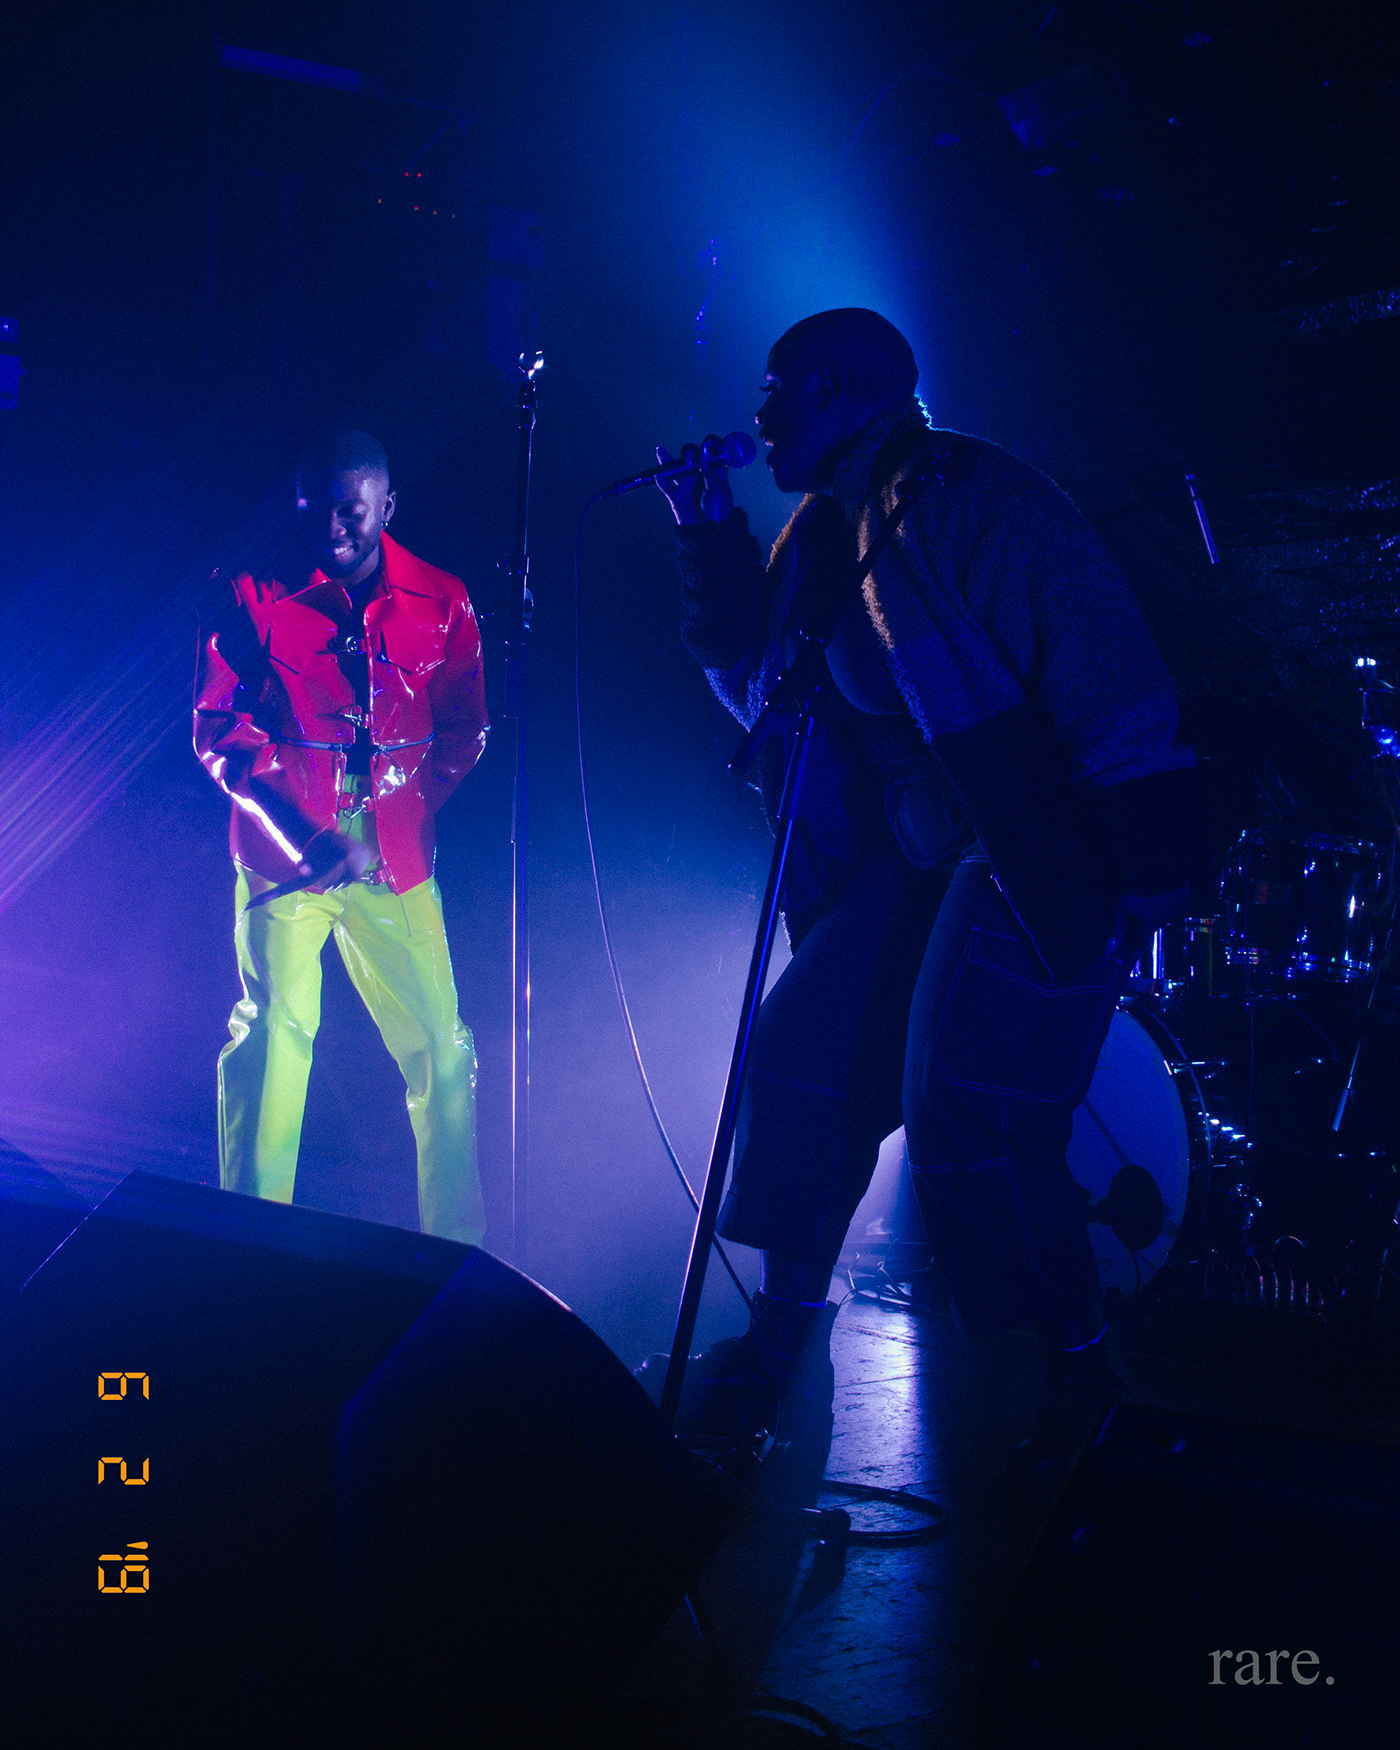 photographay concert low light 24mm star filter Canon 7D music photography lighting London lagos